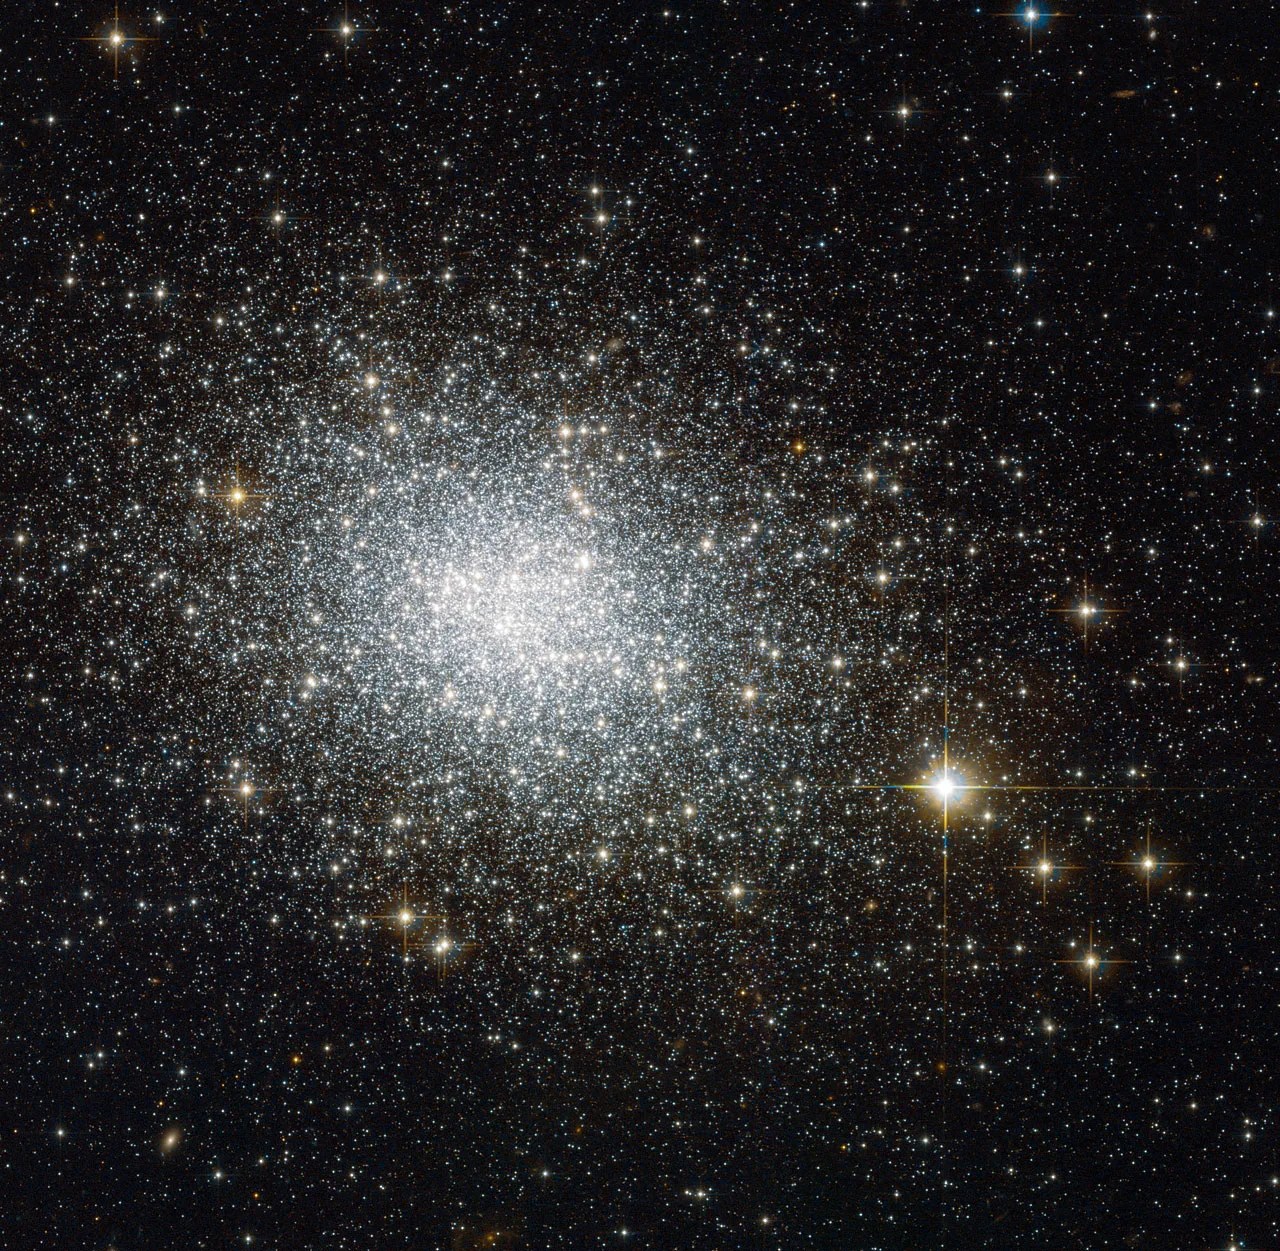 A bright glob of white stars with some yellow blazing through.